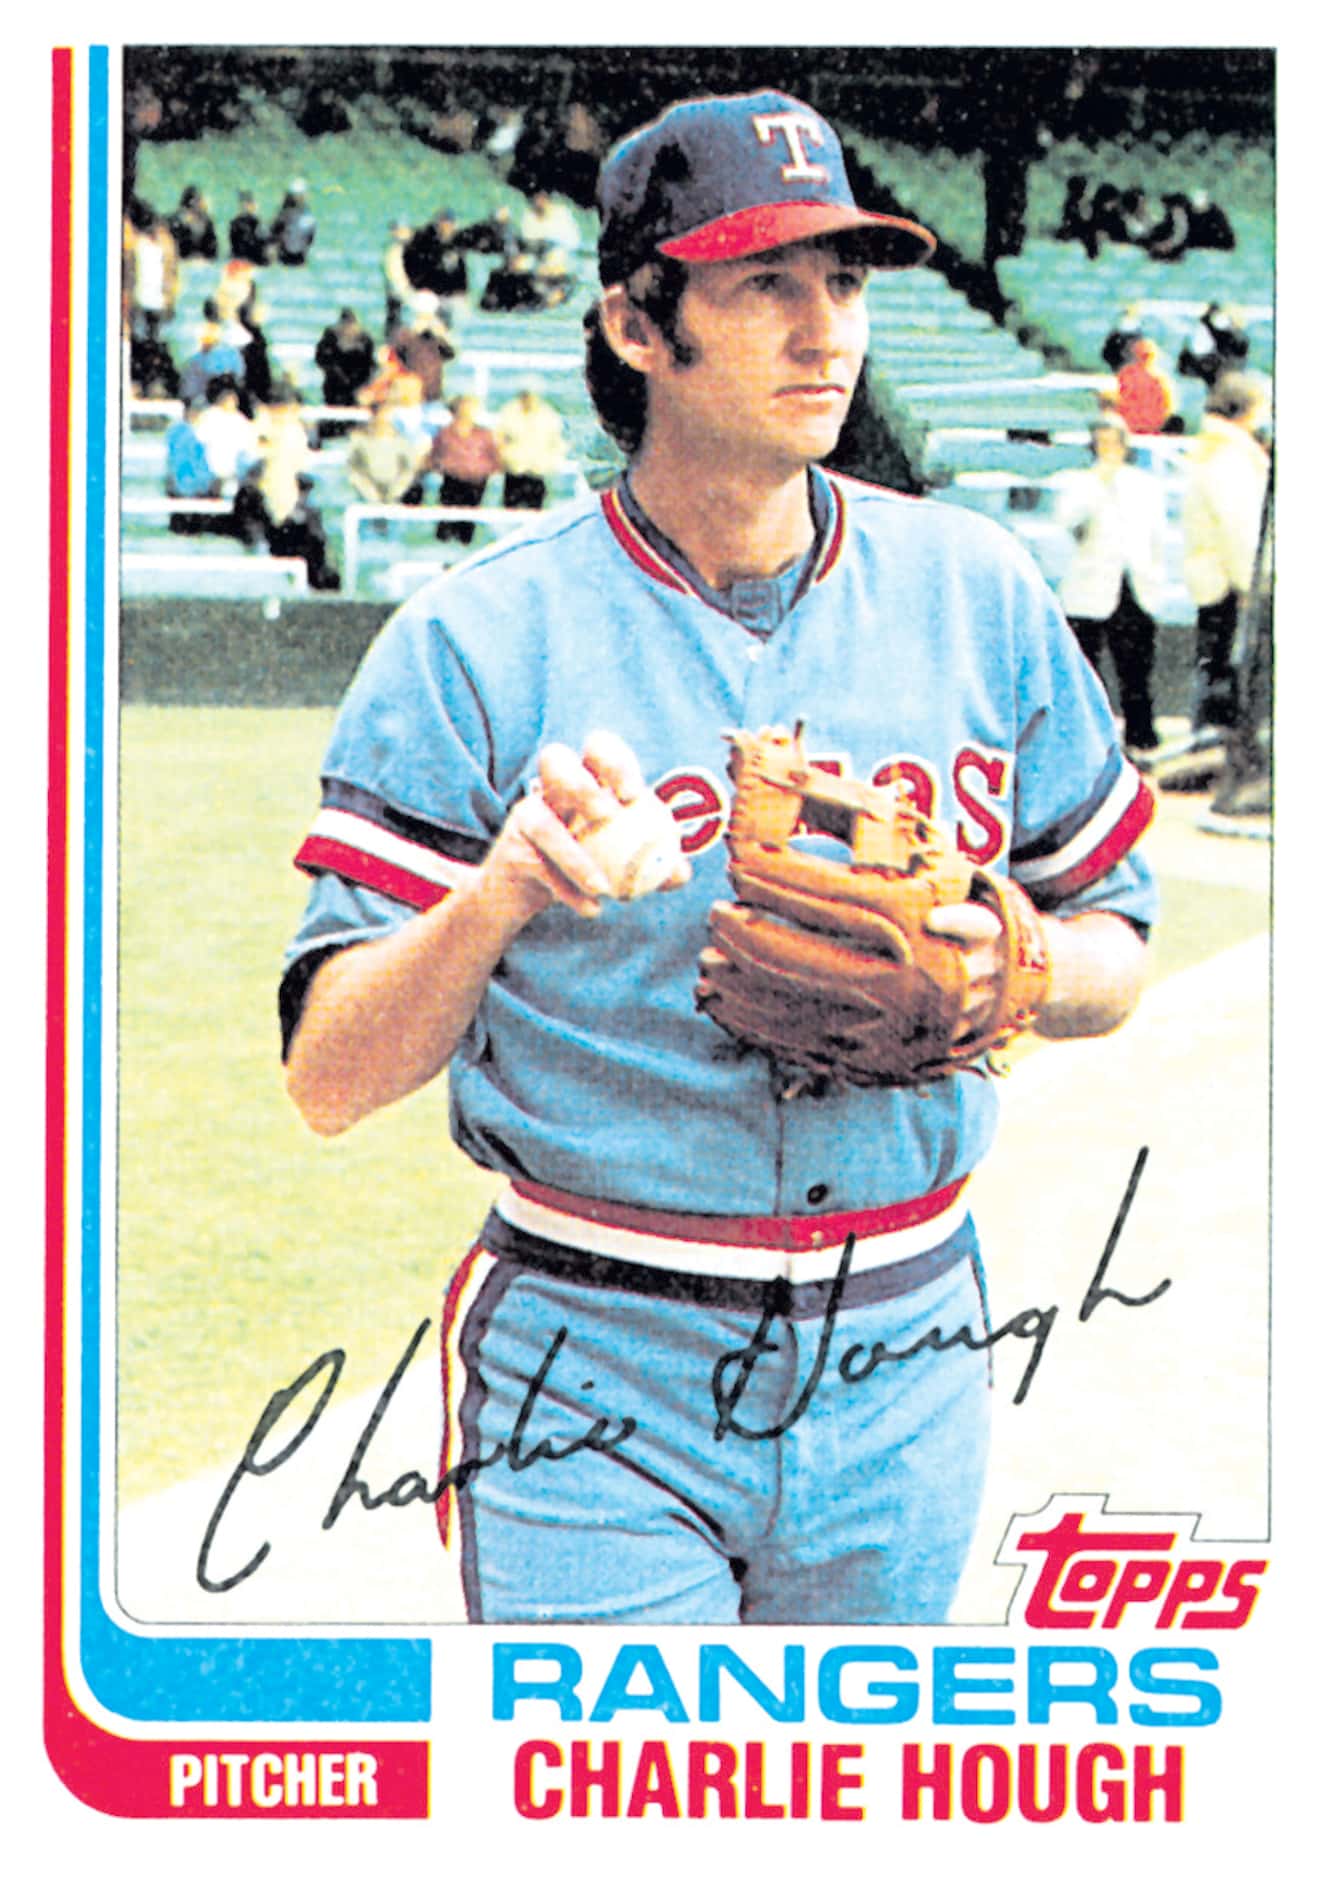 Rangers pitcher Charlie Hough, pictured in the original 1977 powder blues.